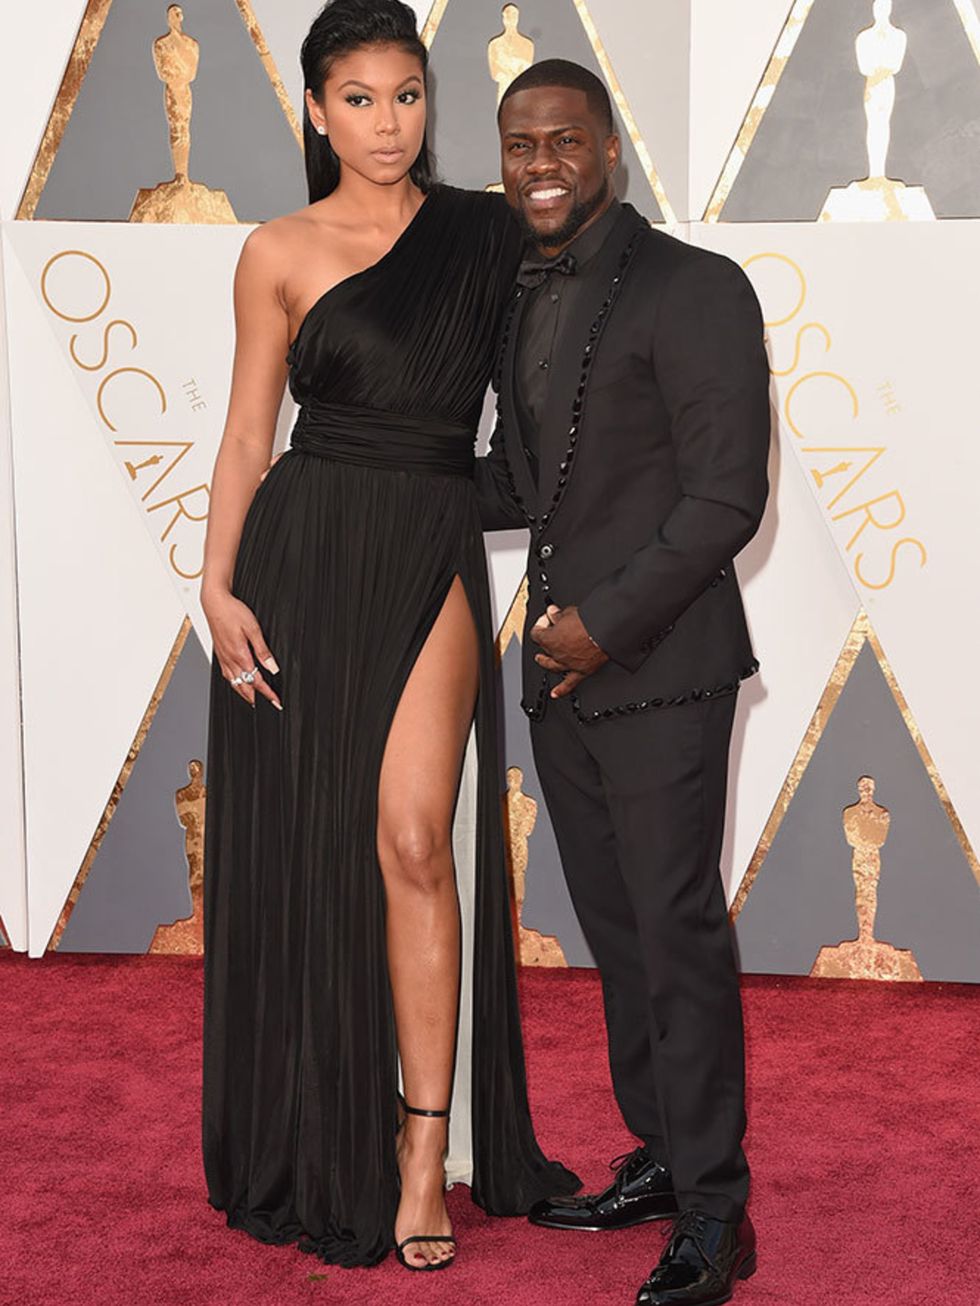 Kevin Hart and Eniko Parrish at the Oscars in LA, February 2016.